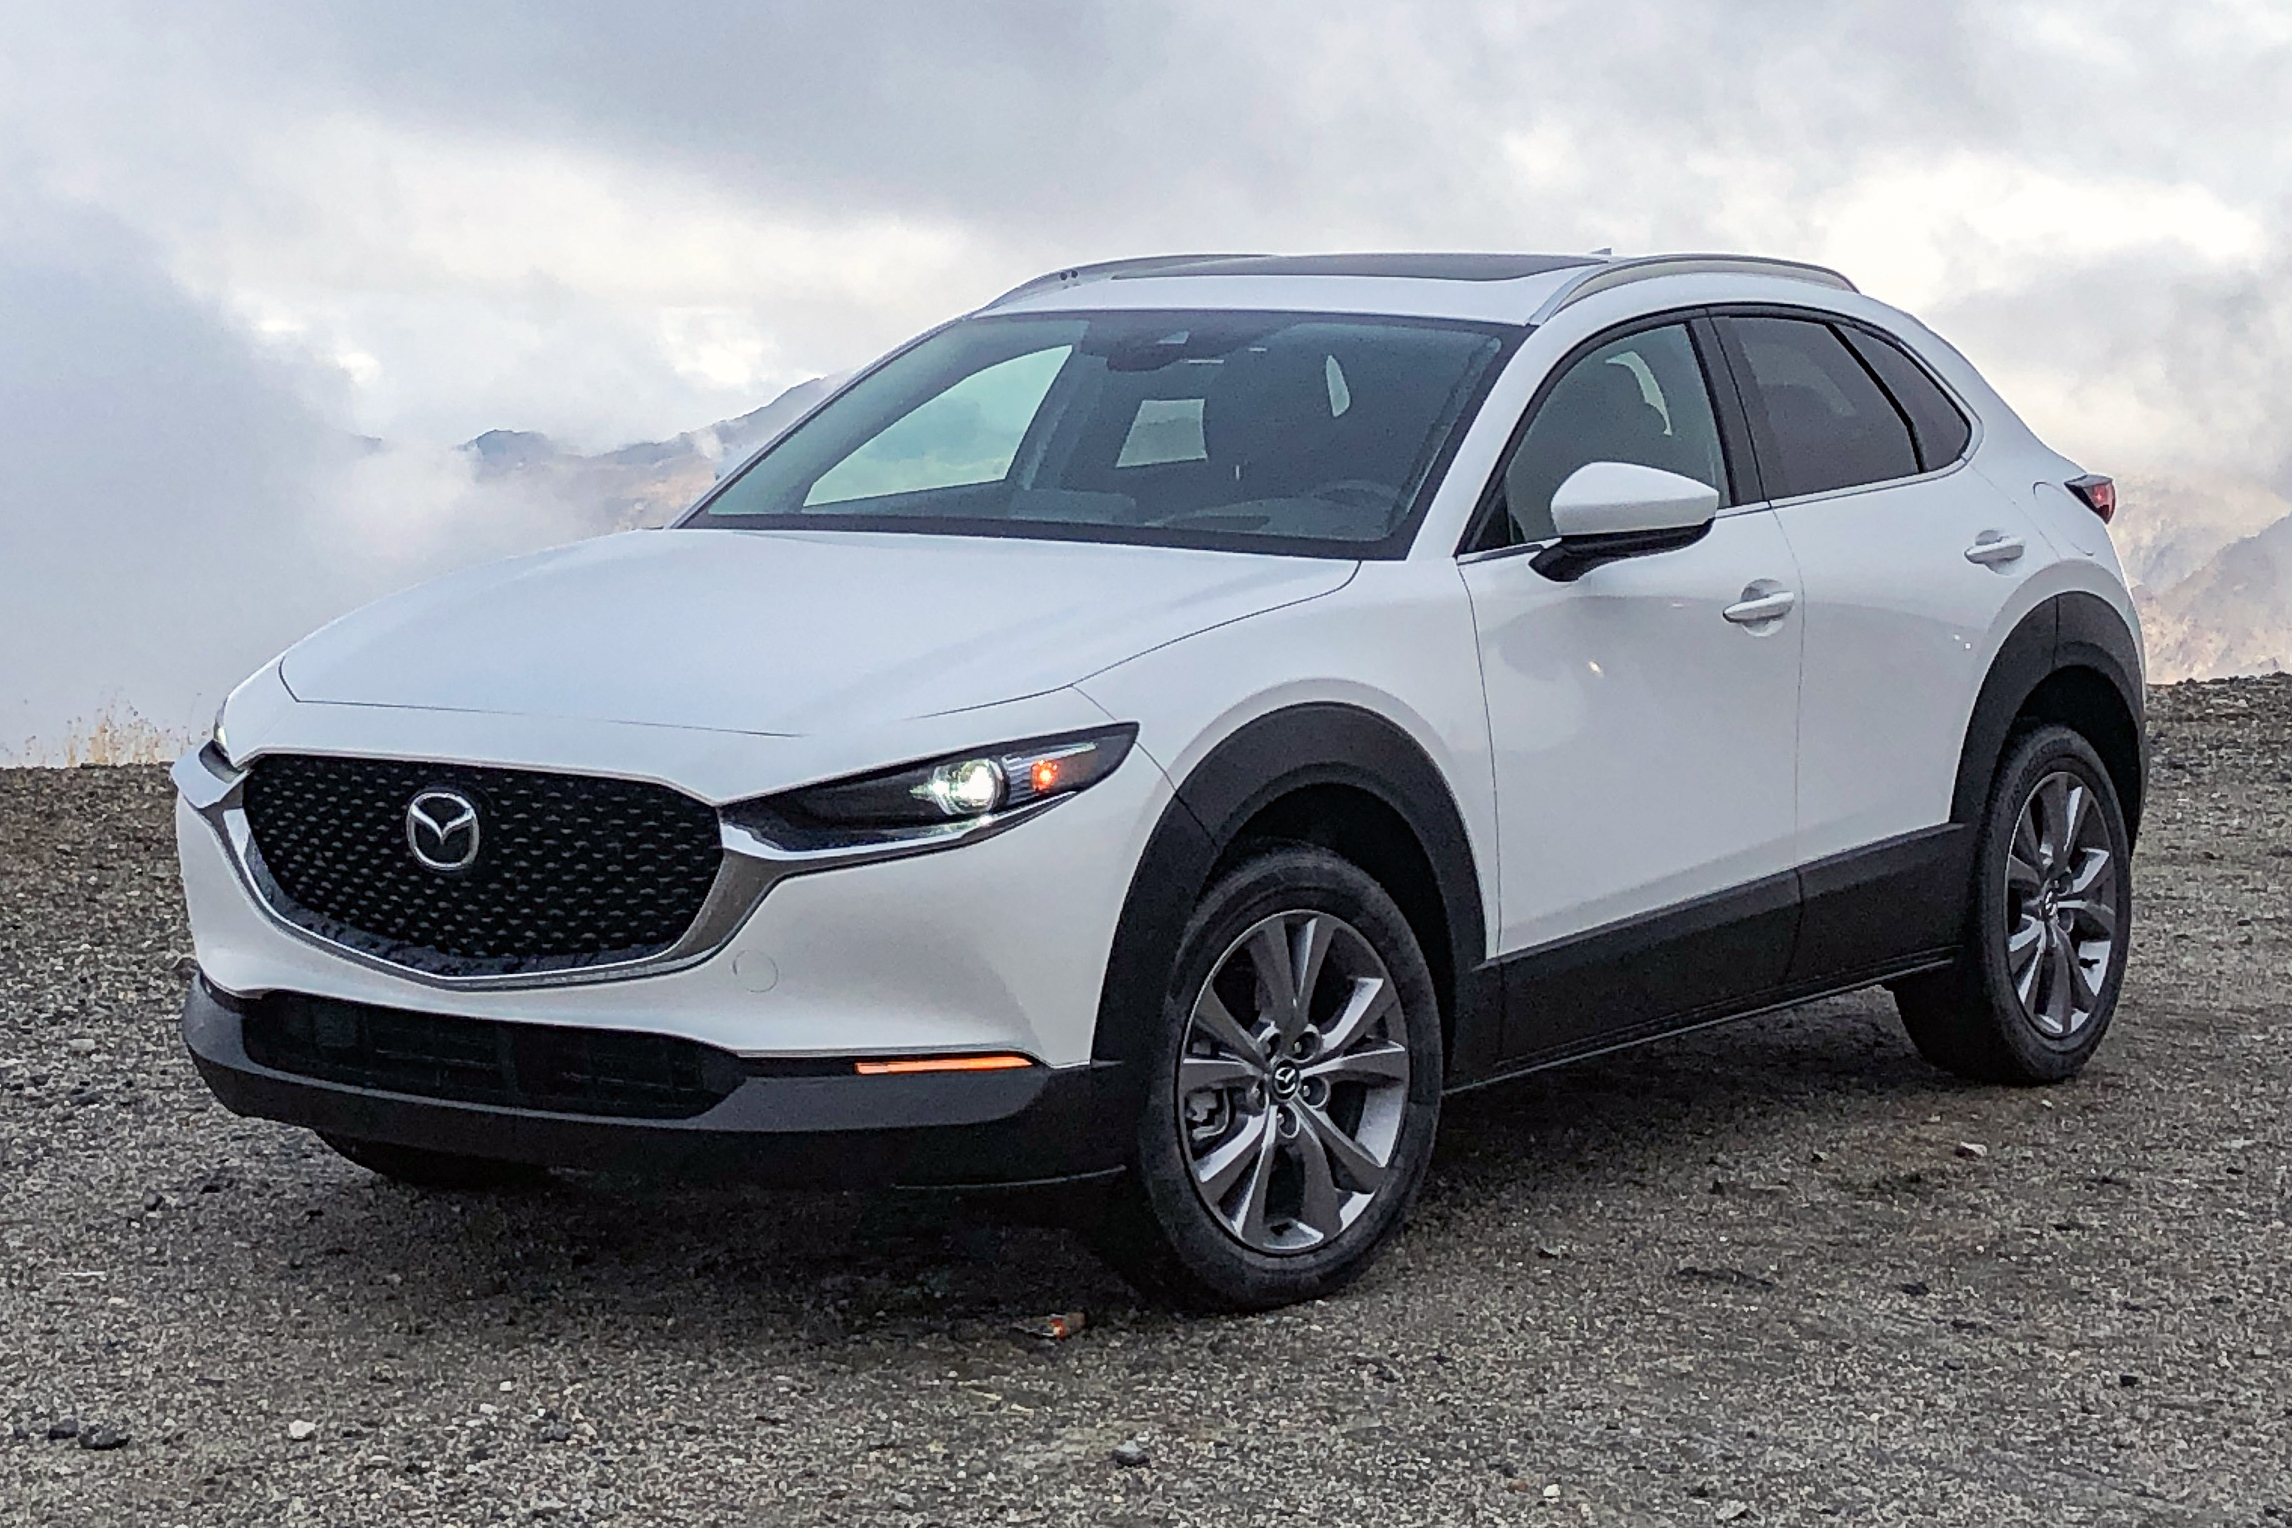 2020 Mazda CX-30 First Drive Review: Premium, Yet Affordable